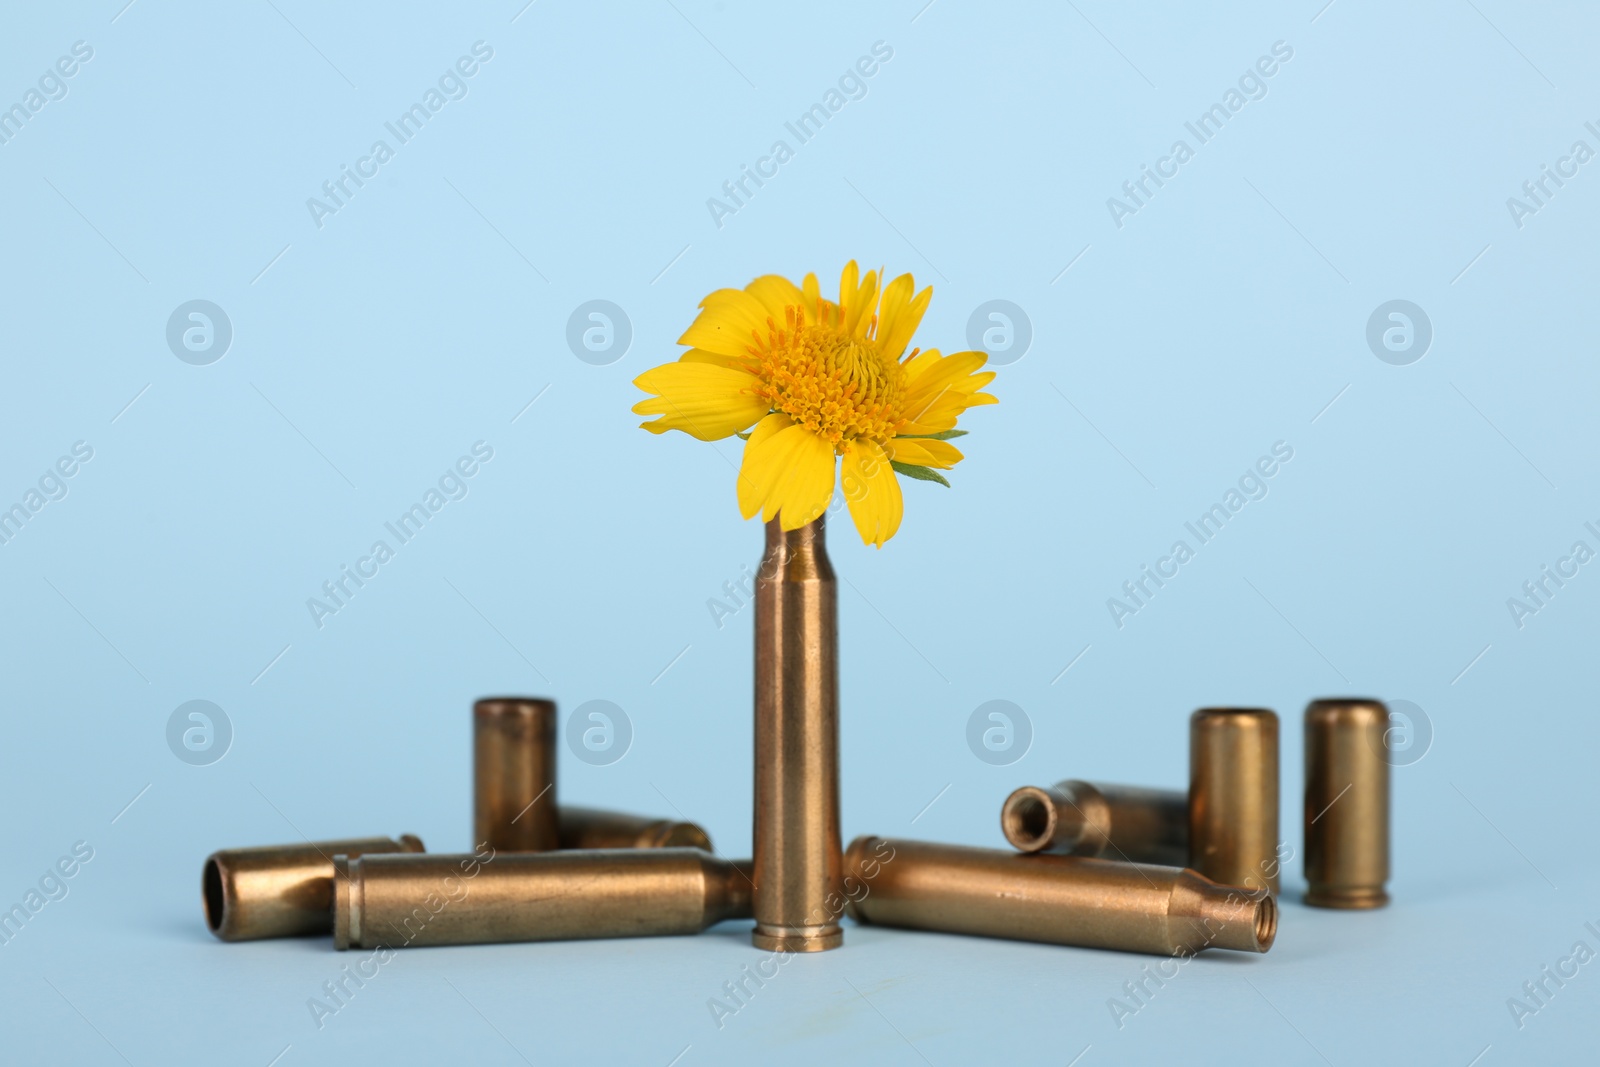 Photo of Bullet cartridge cases and beautiful yellow flower on light blue background